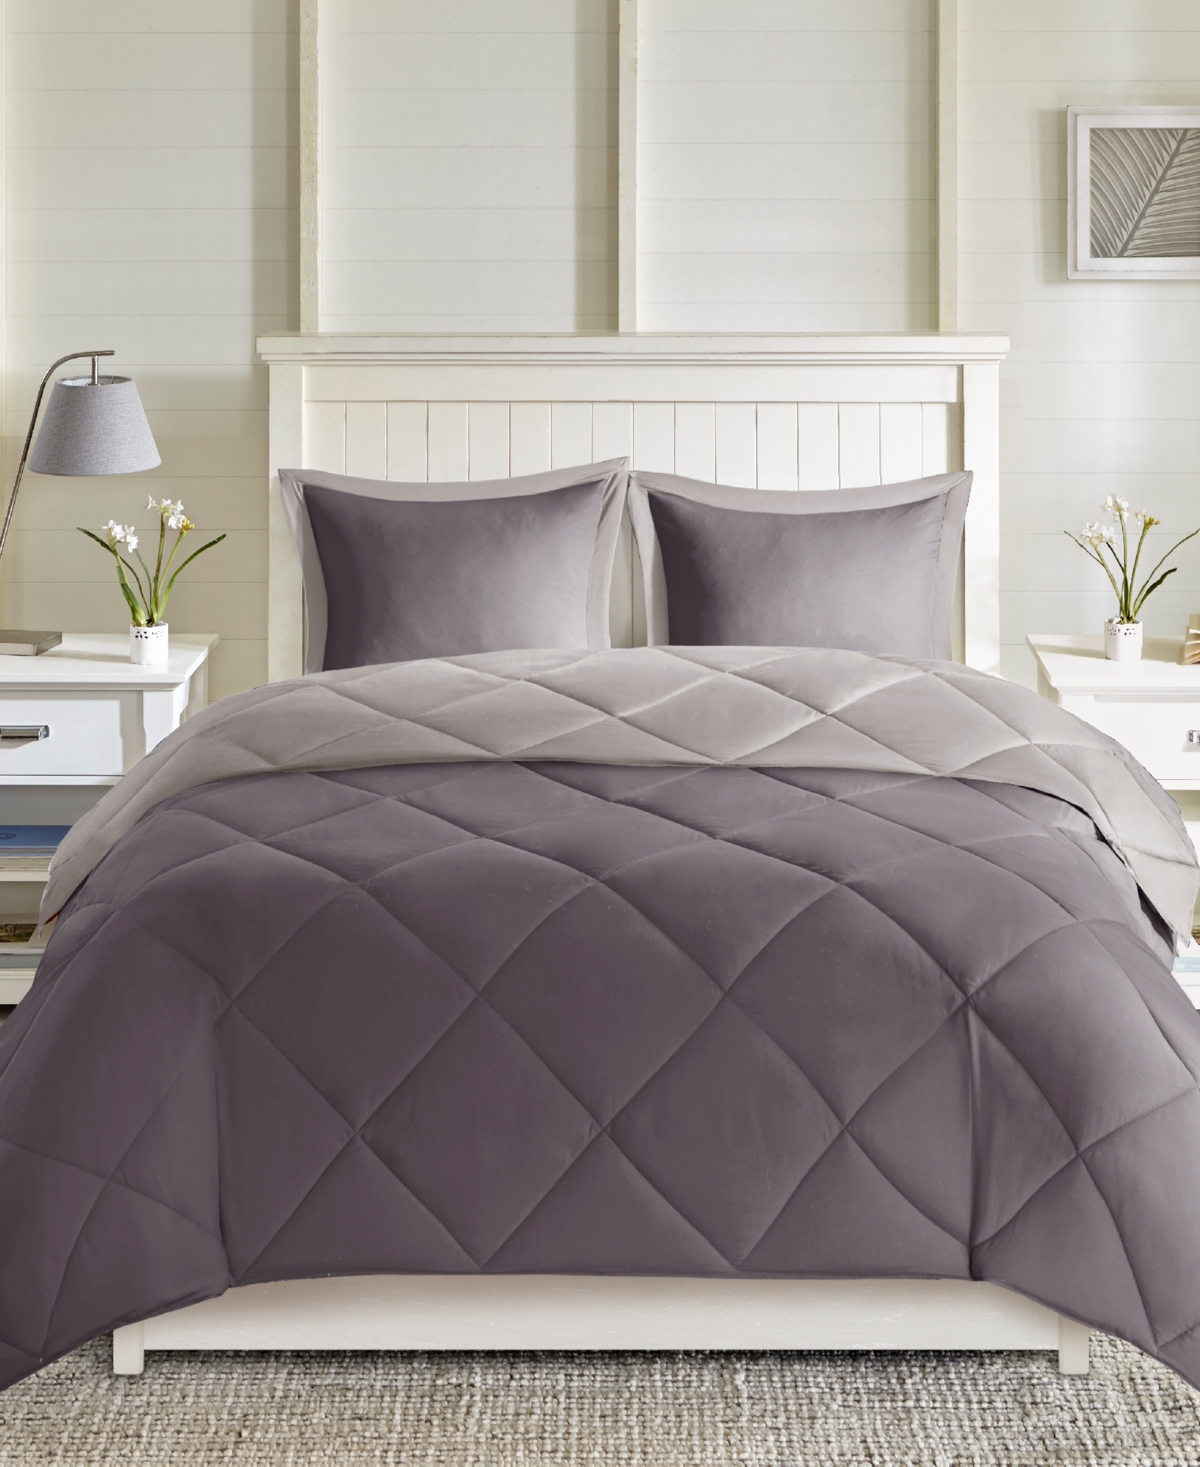 Madison Park Essentials Larkspur Reversible 2-pc. Comforter Set, Twin/twin Xl In Charcoal,grey